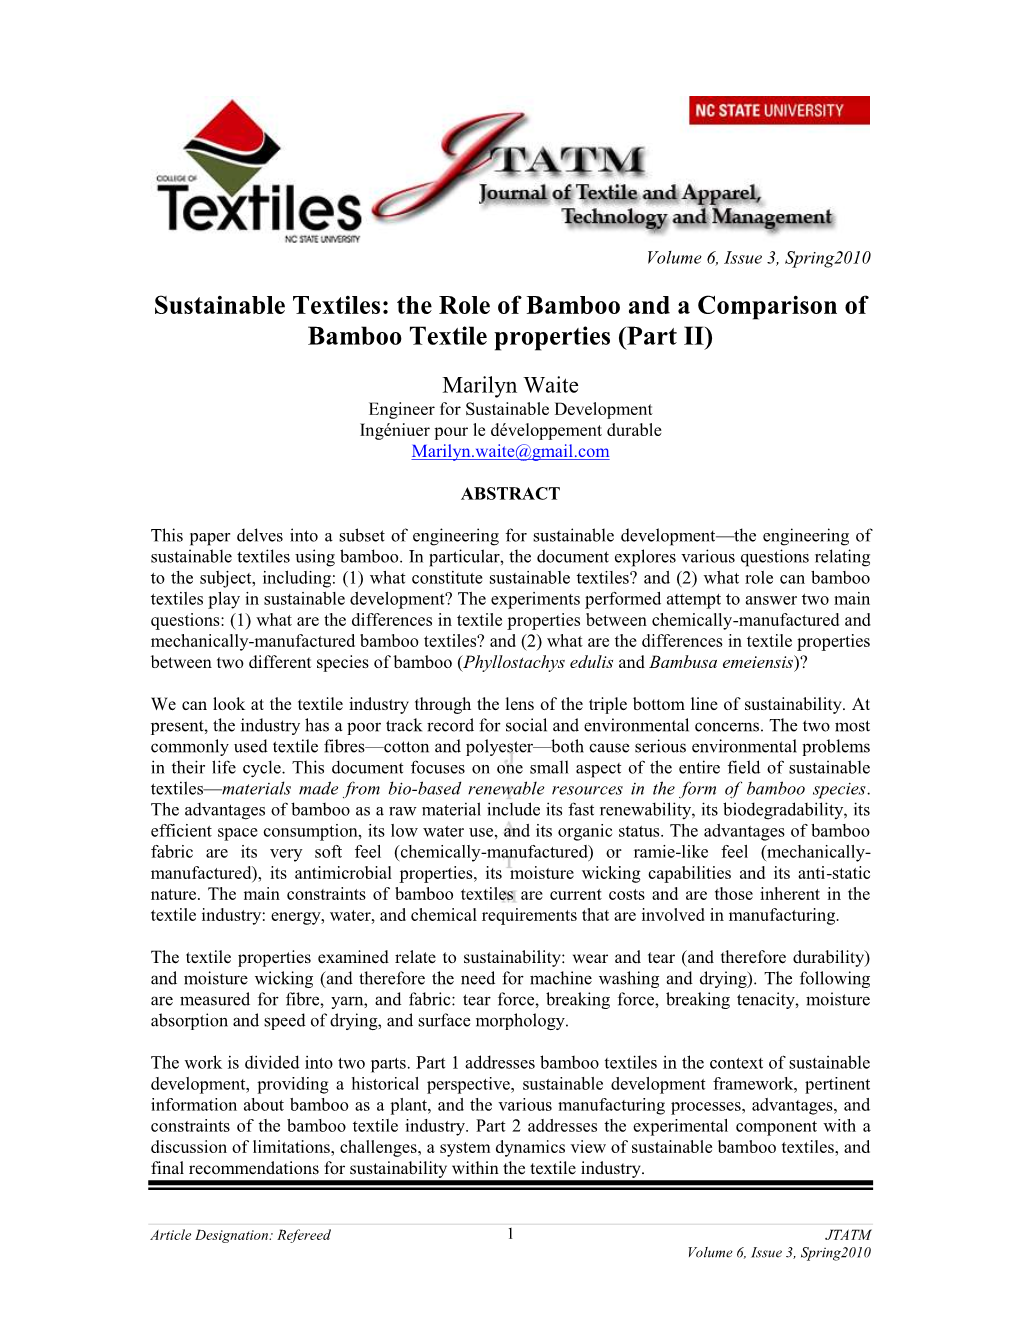 Sustainable Textiles: the Role of Bamboo and a Comparison of Bamboo Textile Properties (Part II)